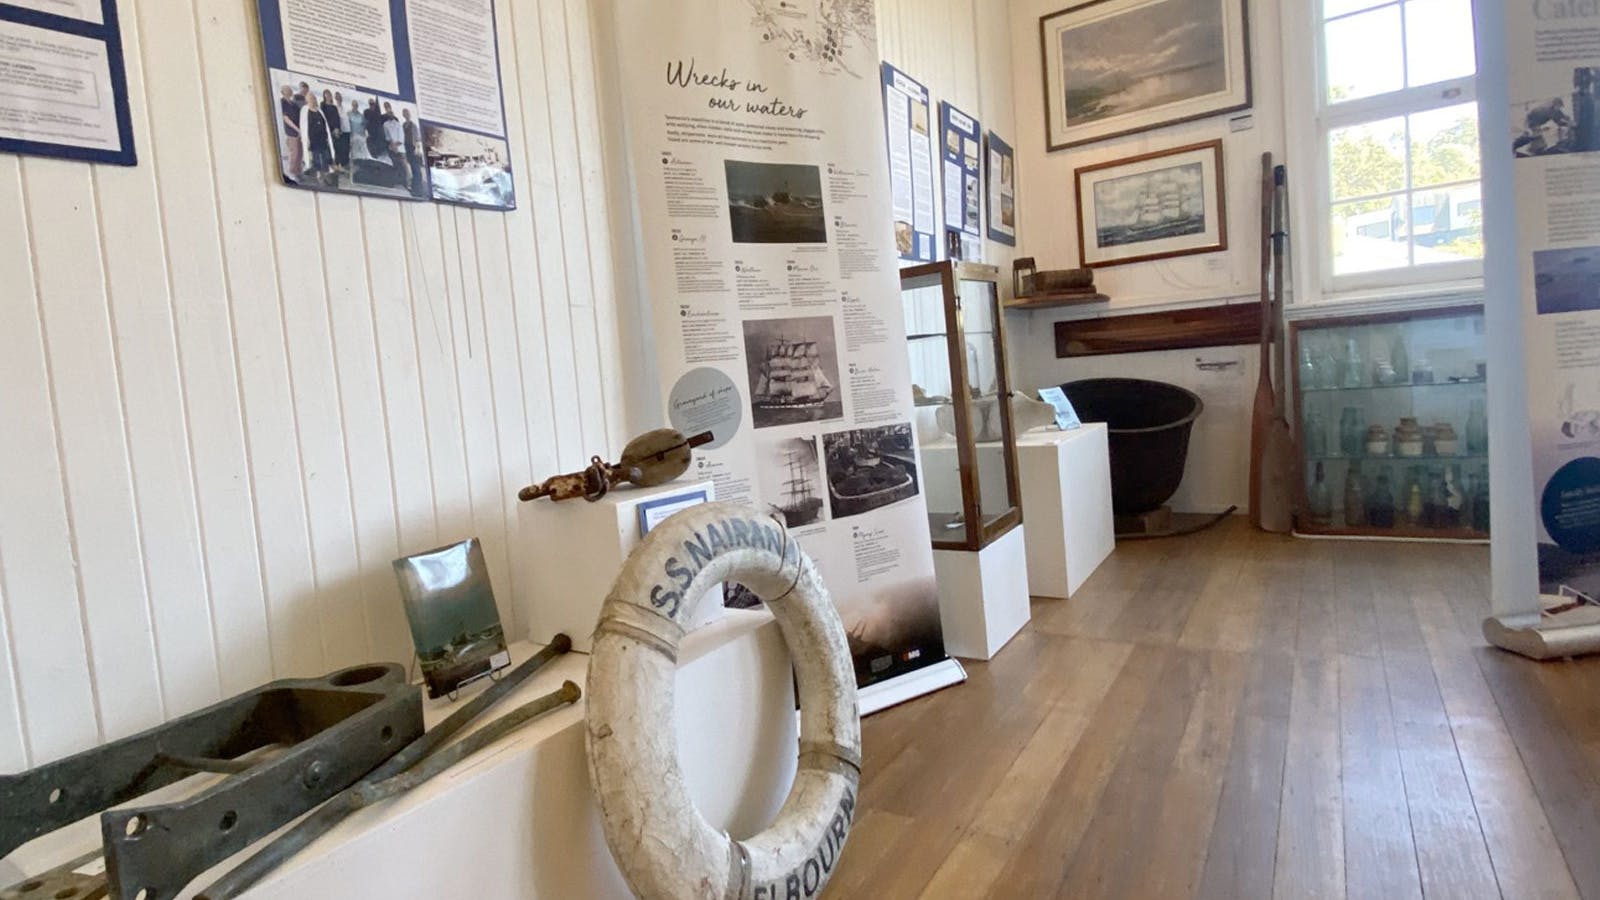 Exhibition on Dover’s maritime history